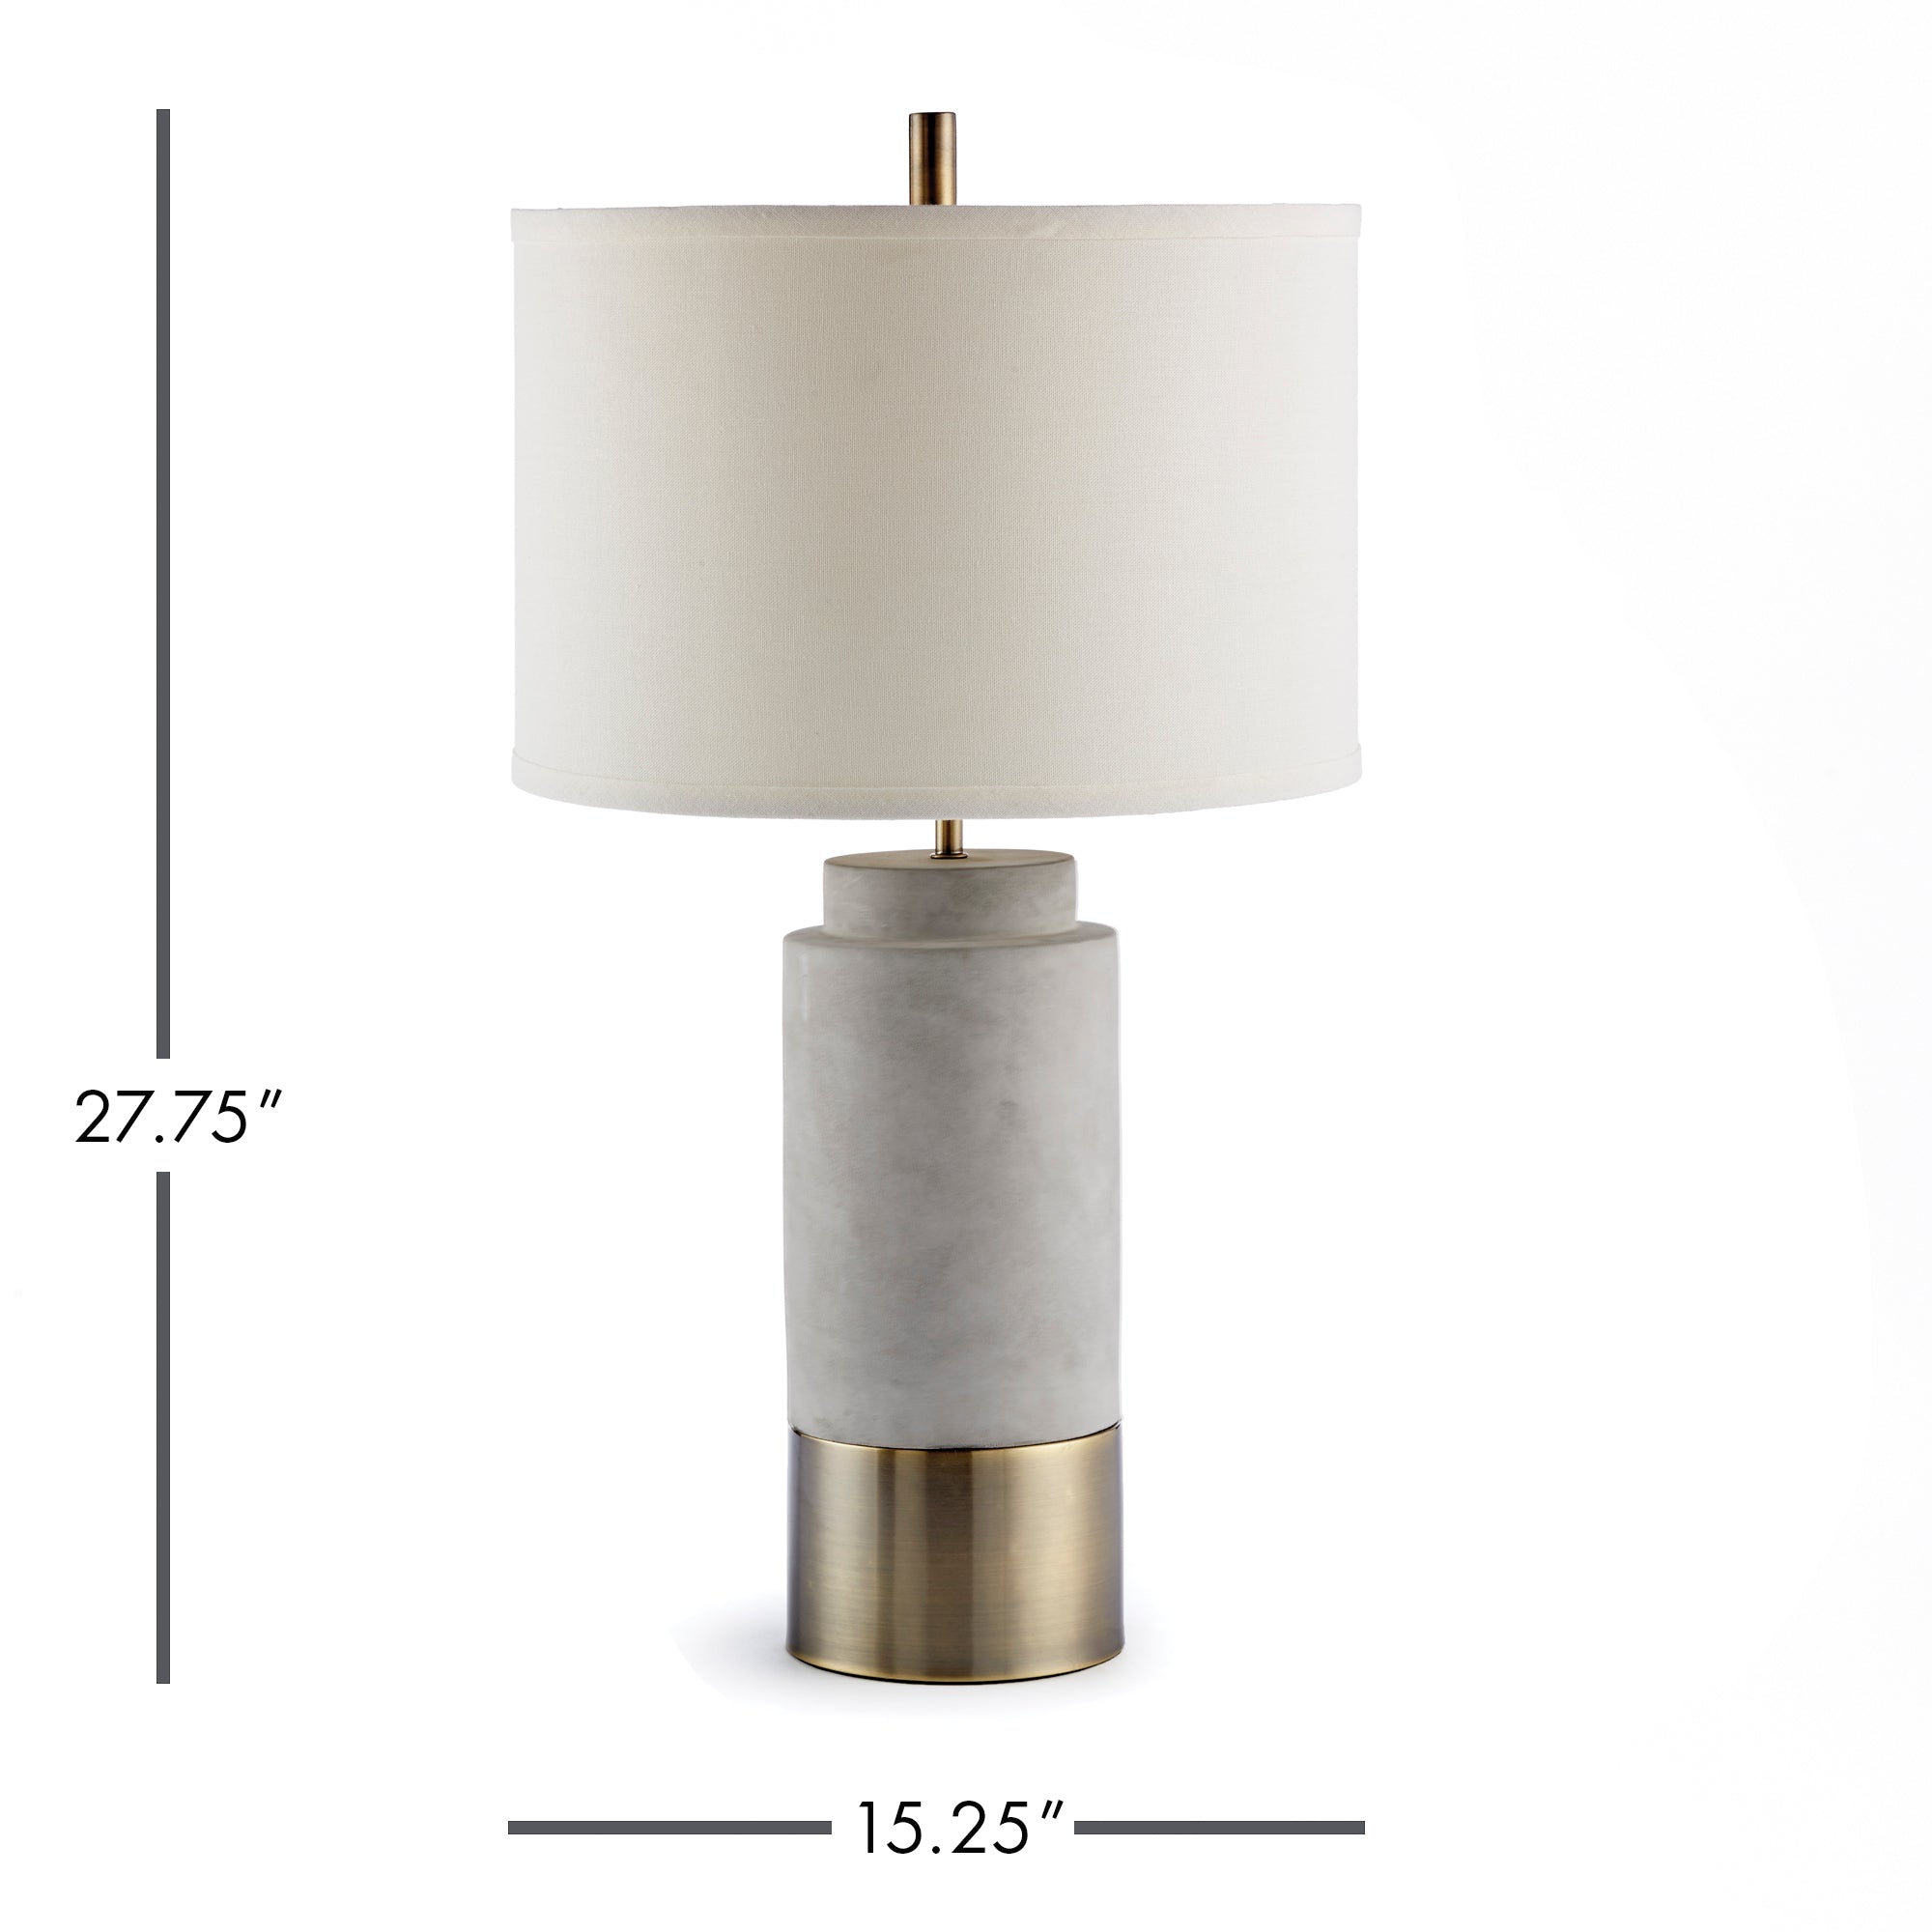 An unexpected mix of cement and brass accents make the Scully Cylinder lamp a stand out piece. The tall, narrow base and tailored shade are well-designed details not to be missed. Amethyst Home provides interior design, new construction, custom furniture, and area rugs in the Nashville metro area.